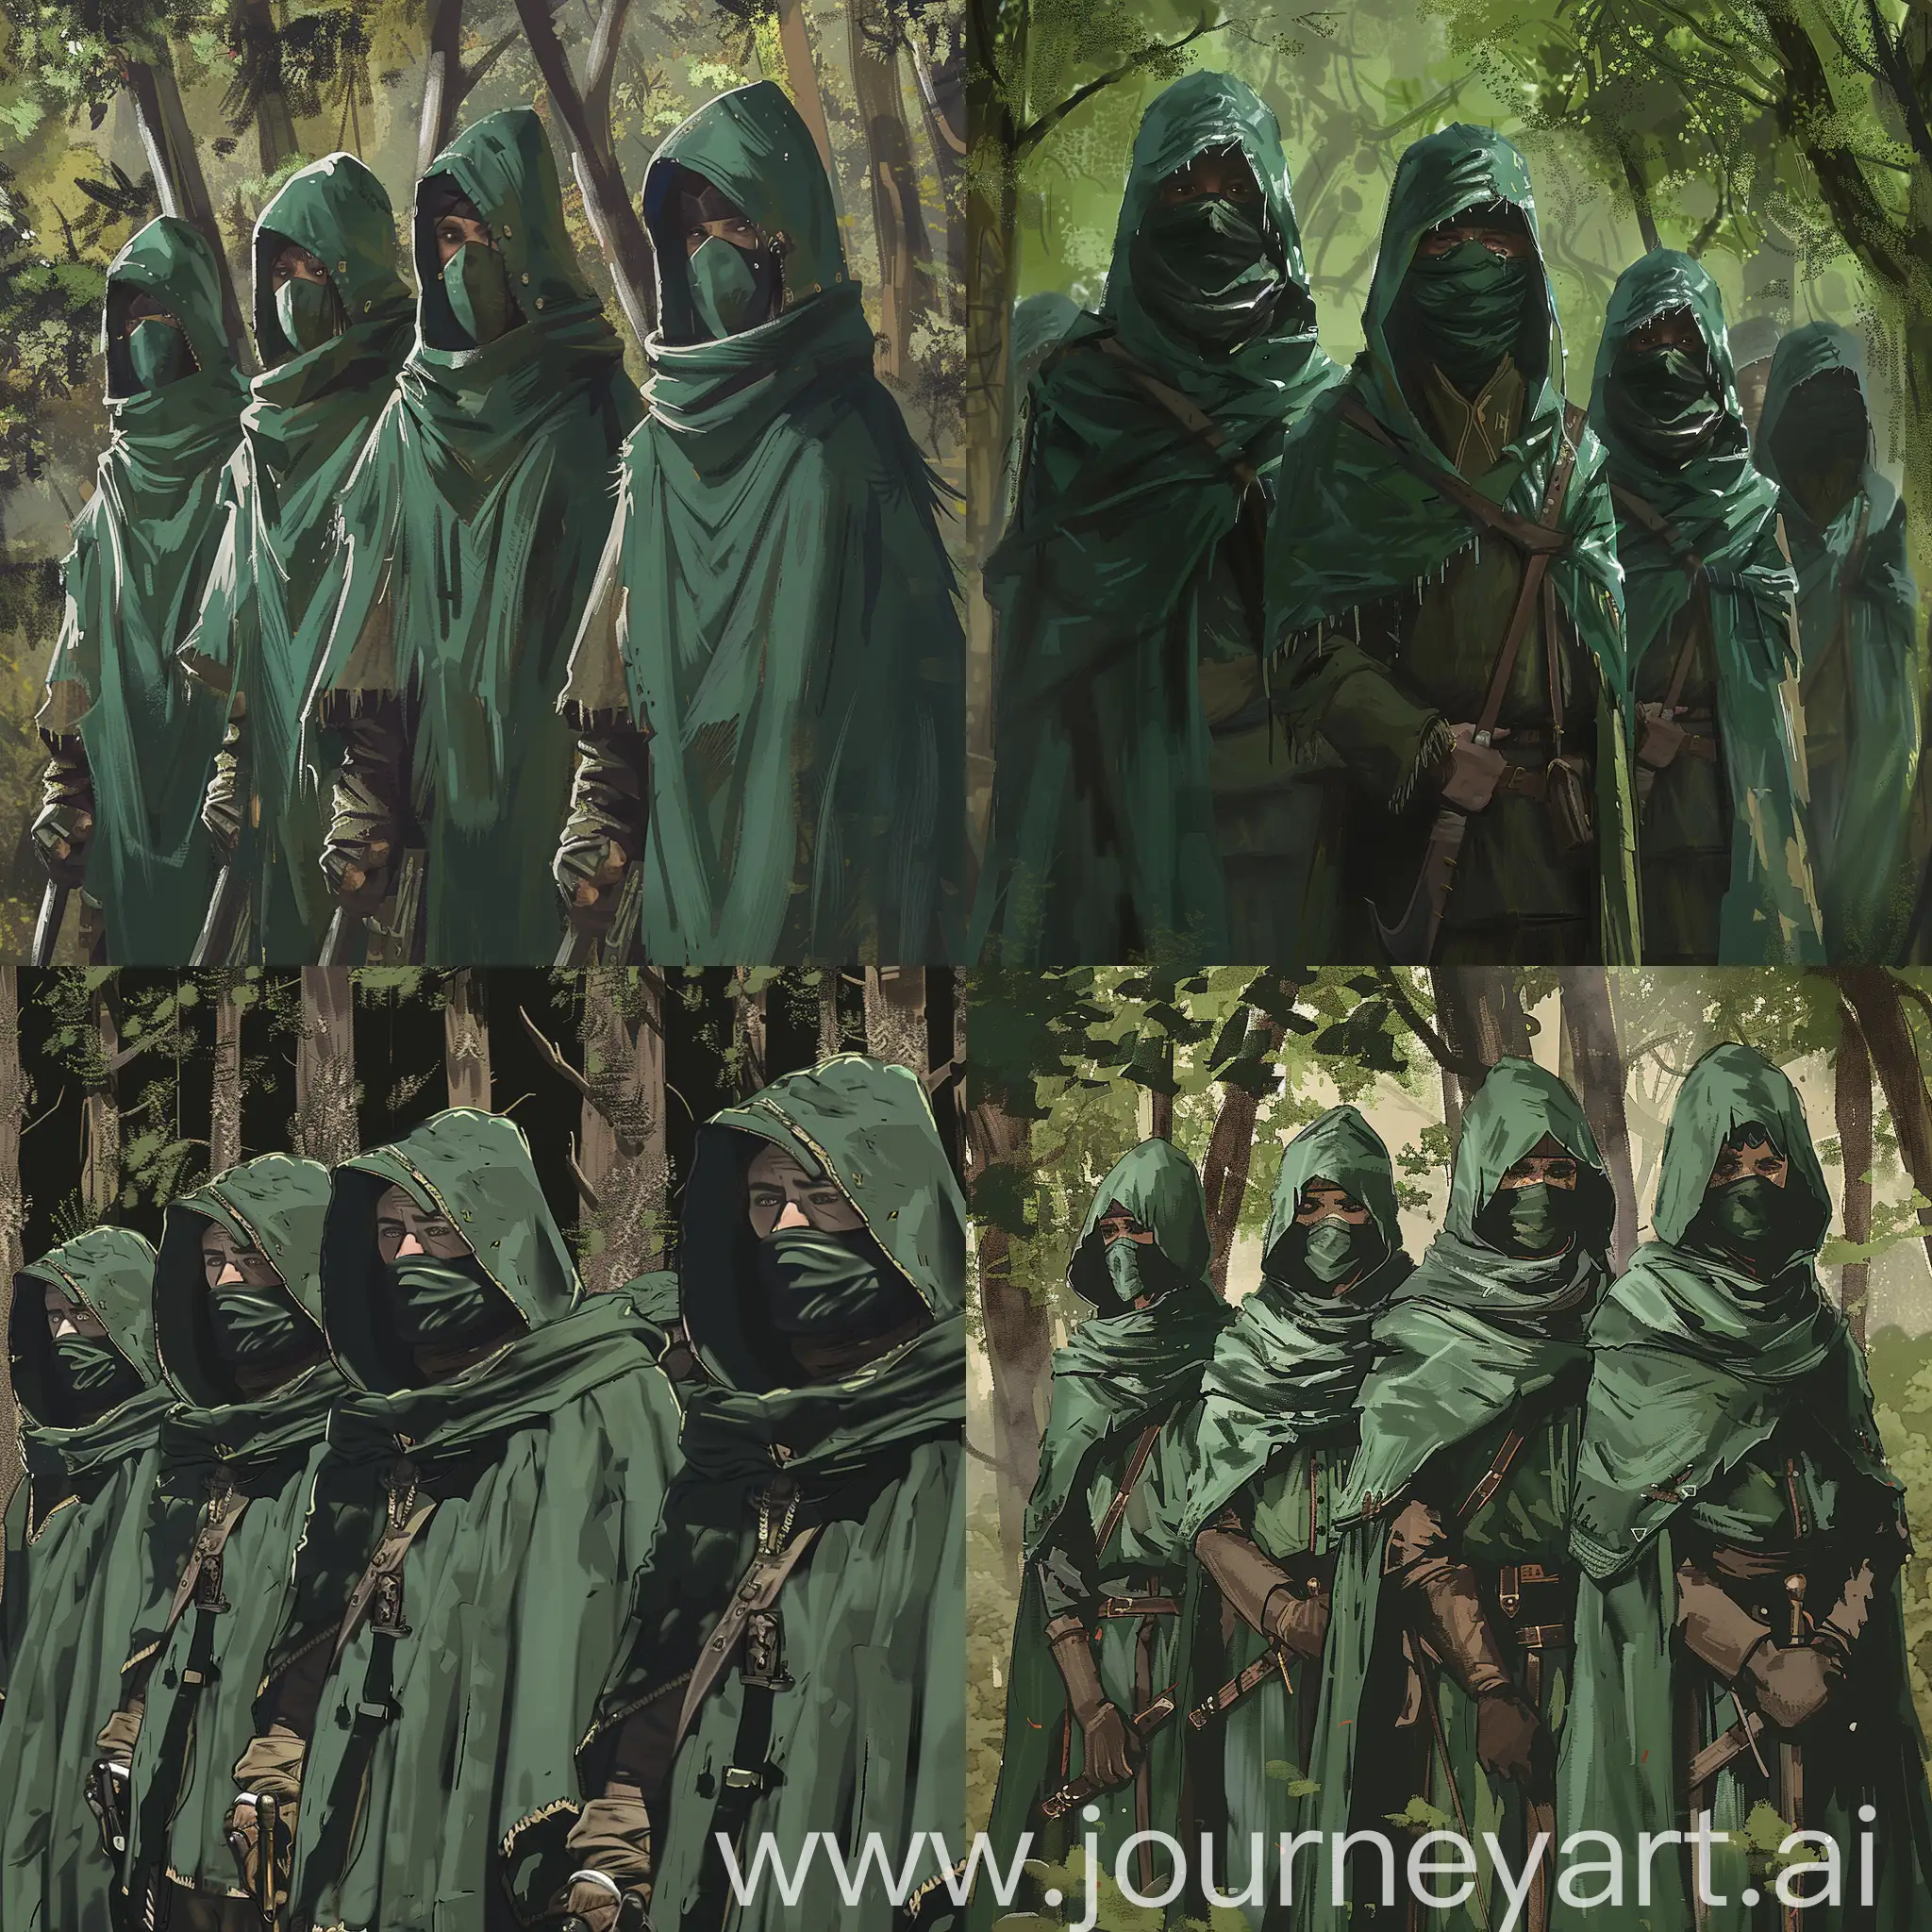 Forest-Detachment-of-Dunedin-Trackers-in-Green-Hooded-Cloaks-and-Masks-Crusader-Kings-3-Style